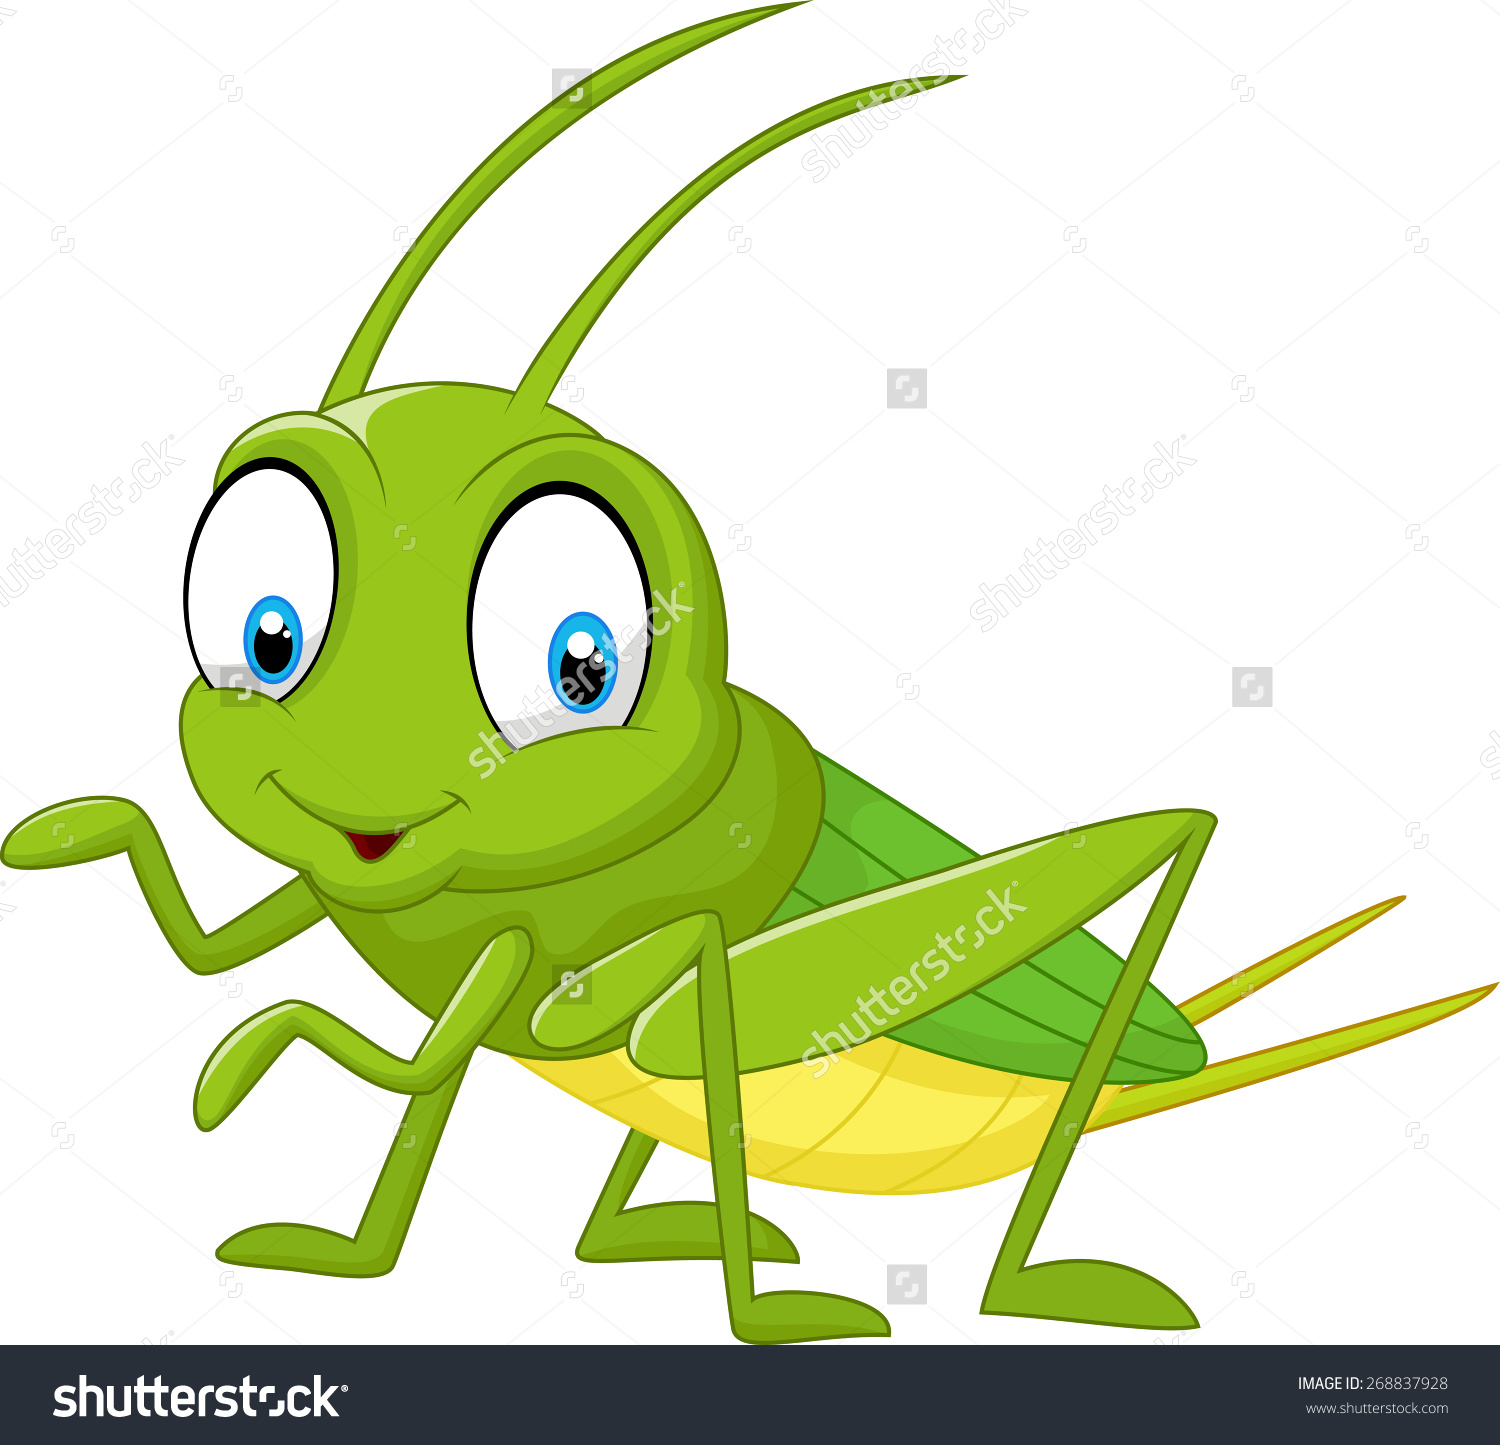 clipart insect - photo #50